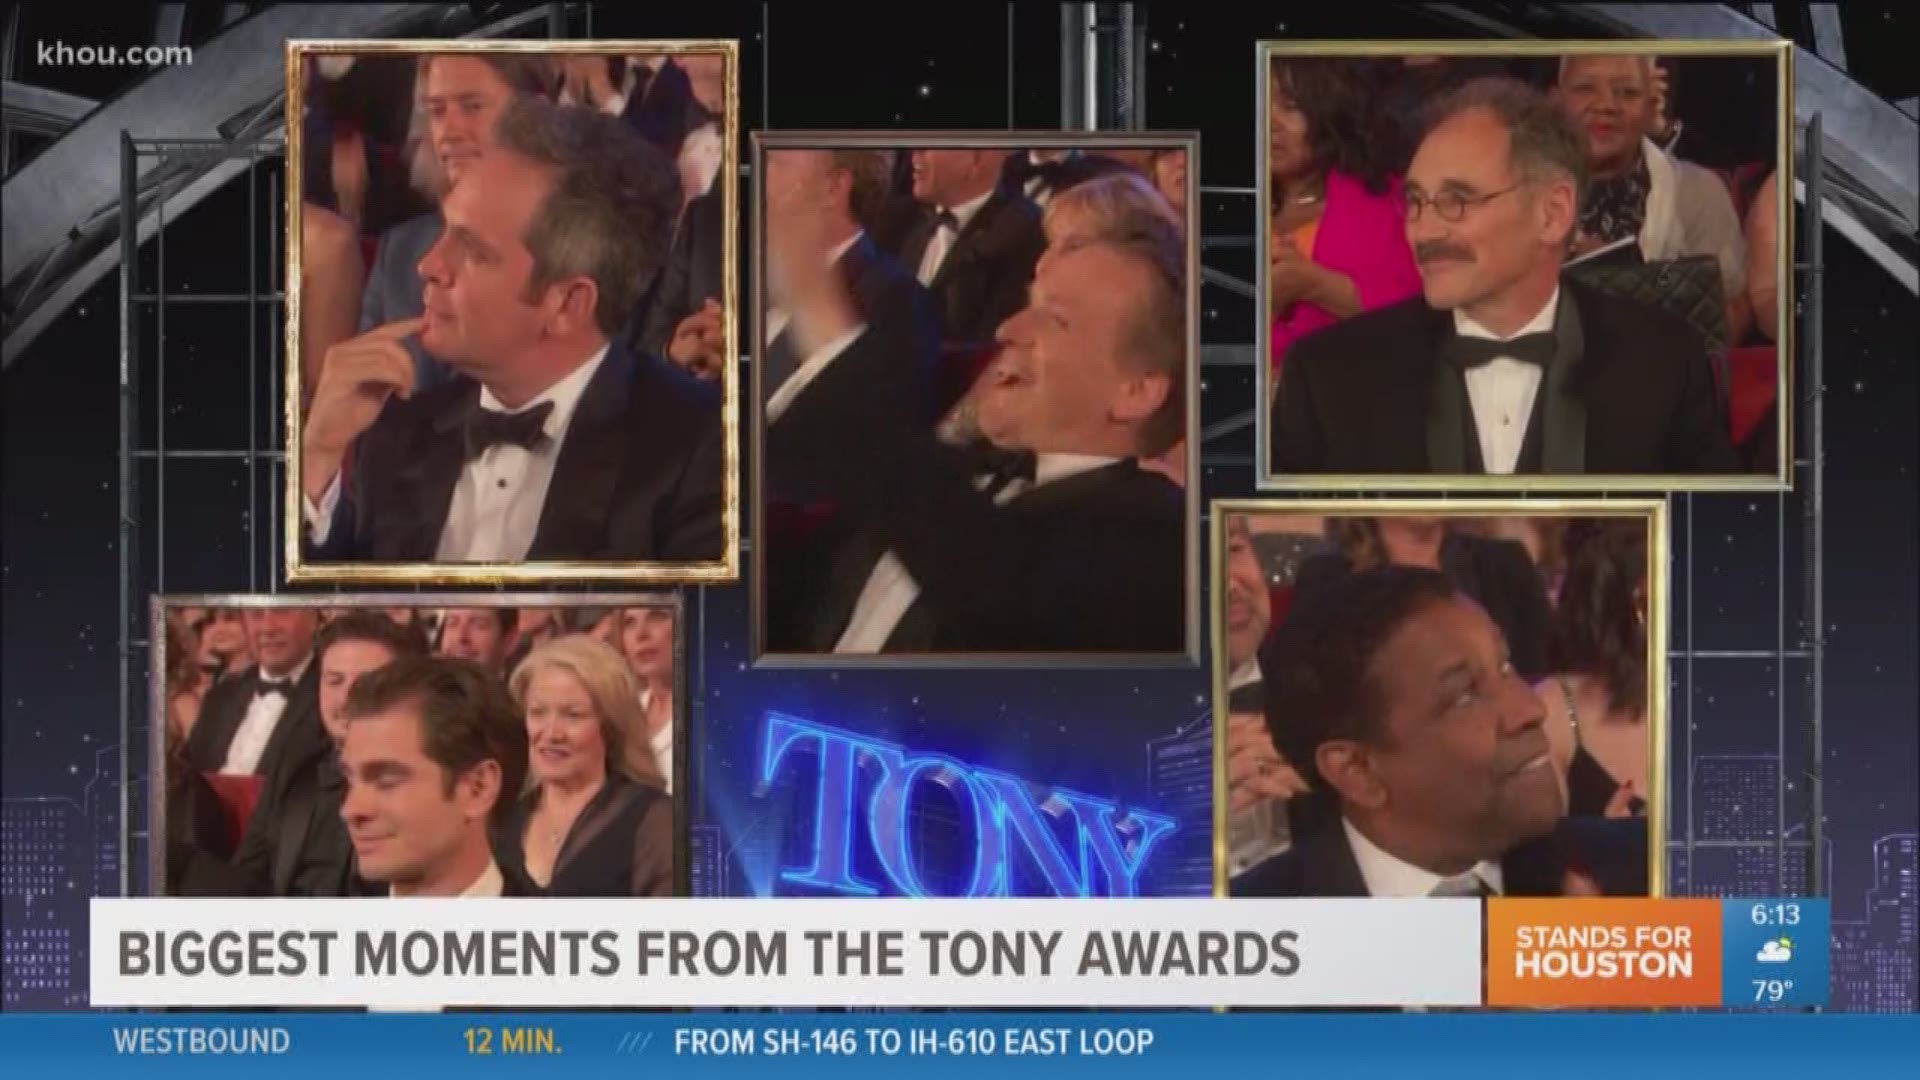 Tony Awards most talked-about moments